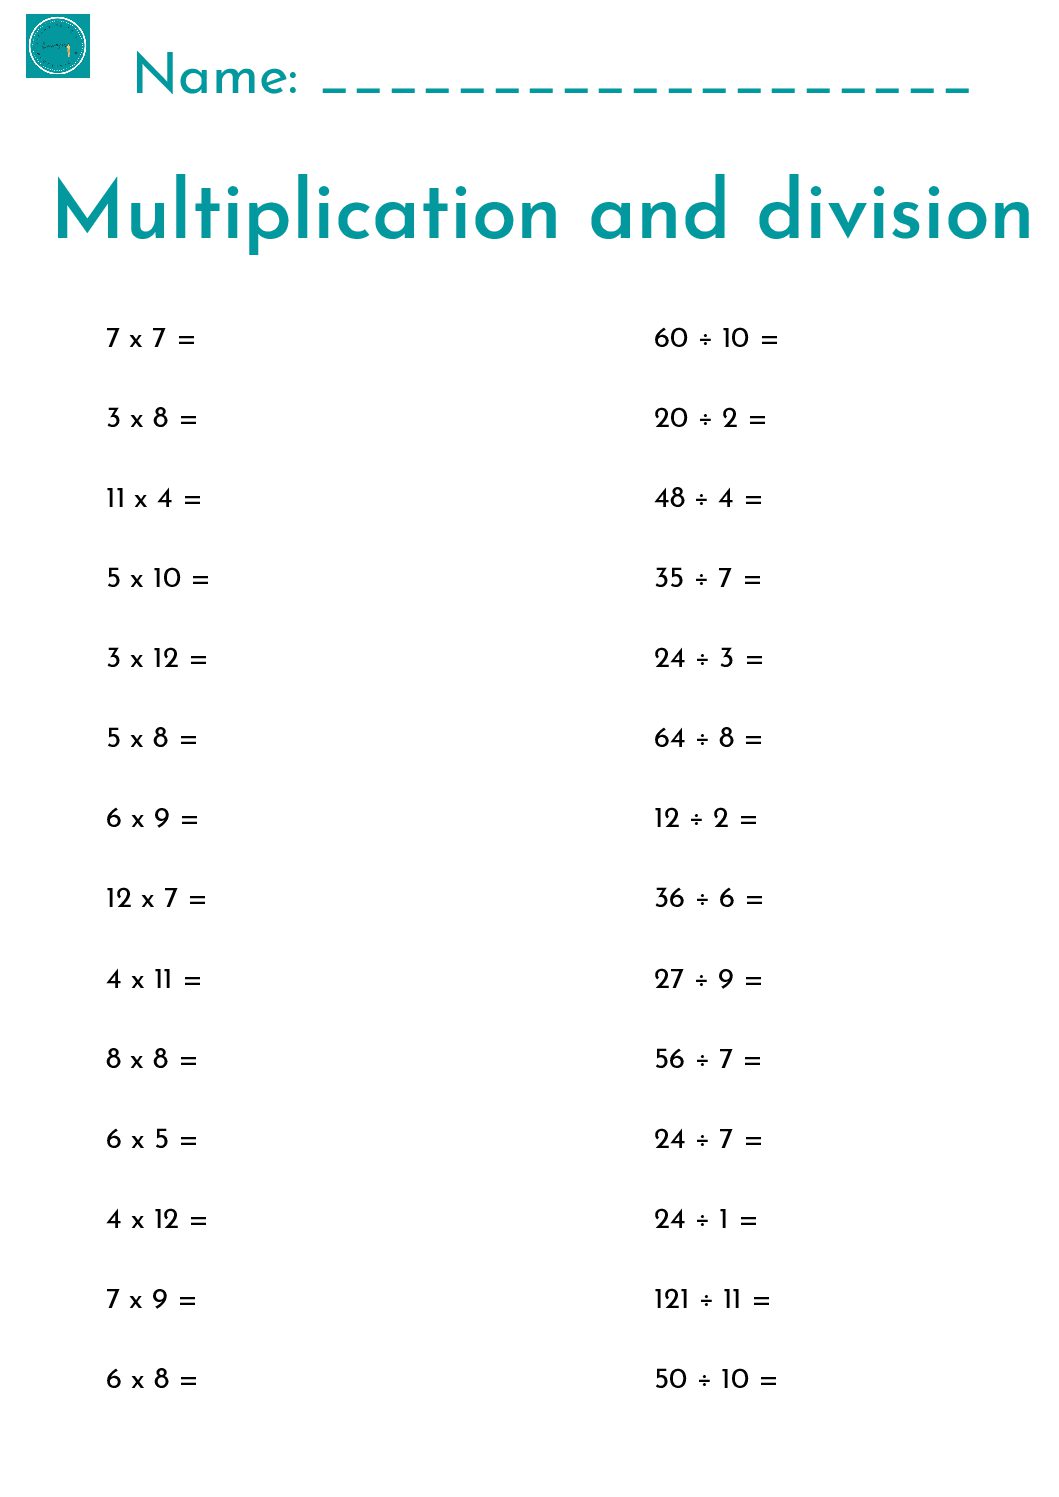 Marin hanche syndrome multiplication and division worksheets Impliqué